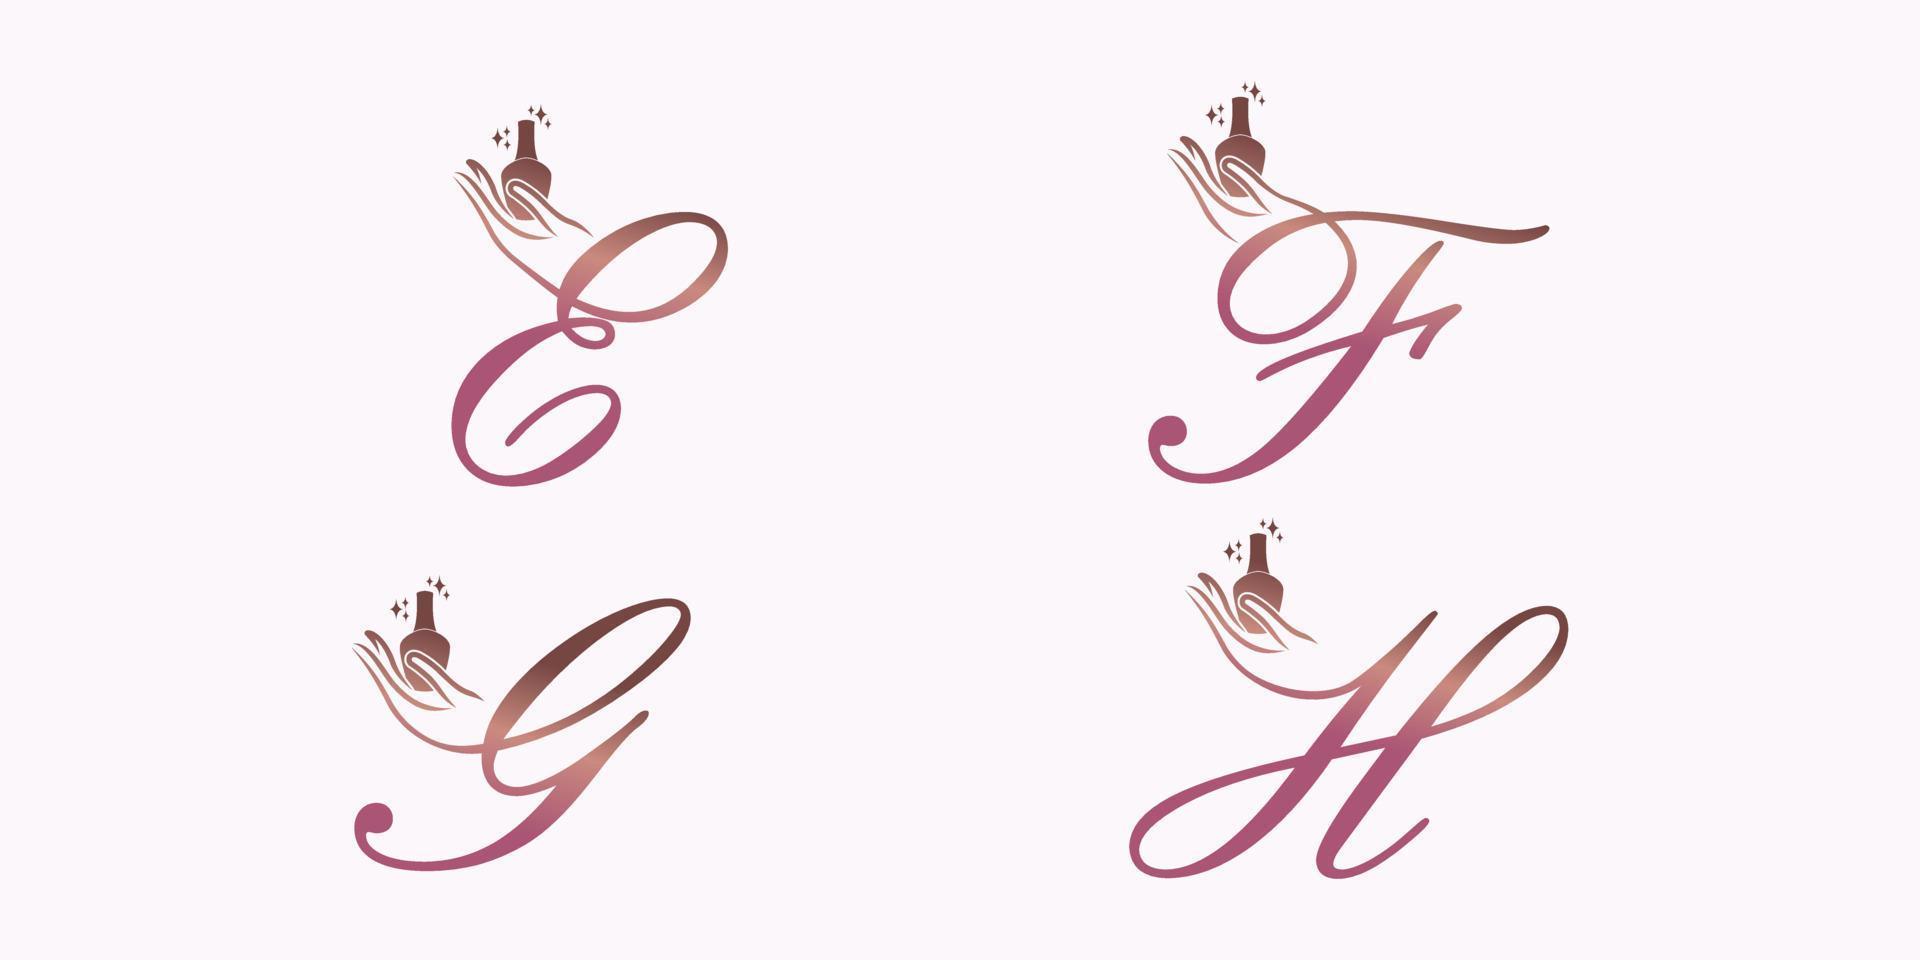 set of letter font logo design vector with nail polish beauty icon